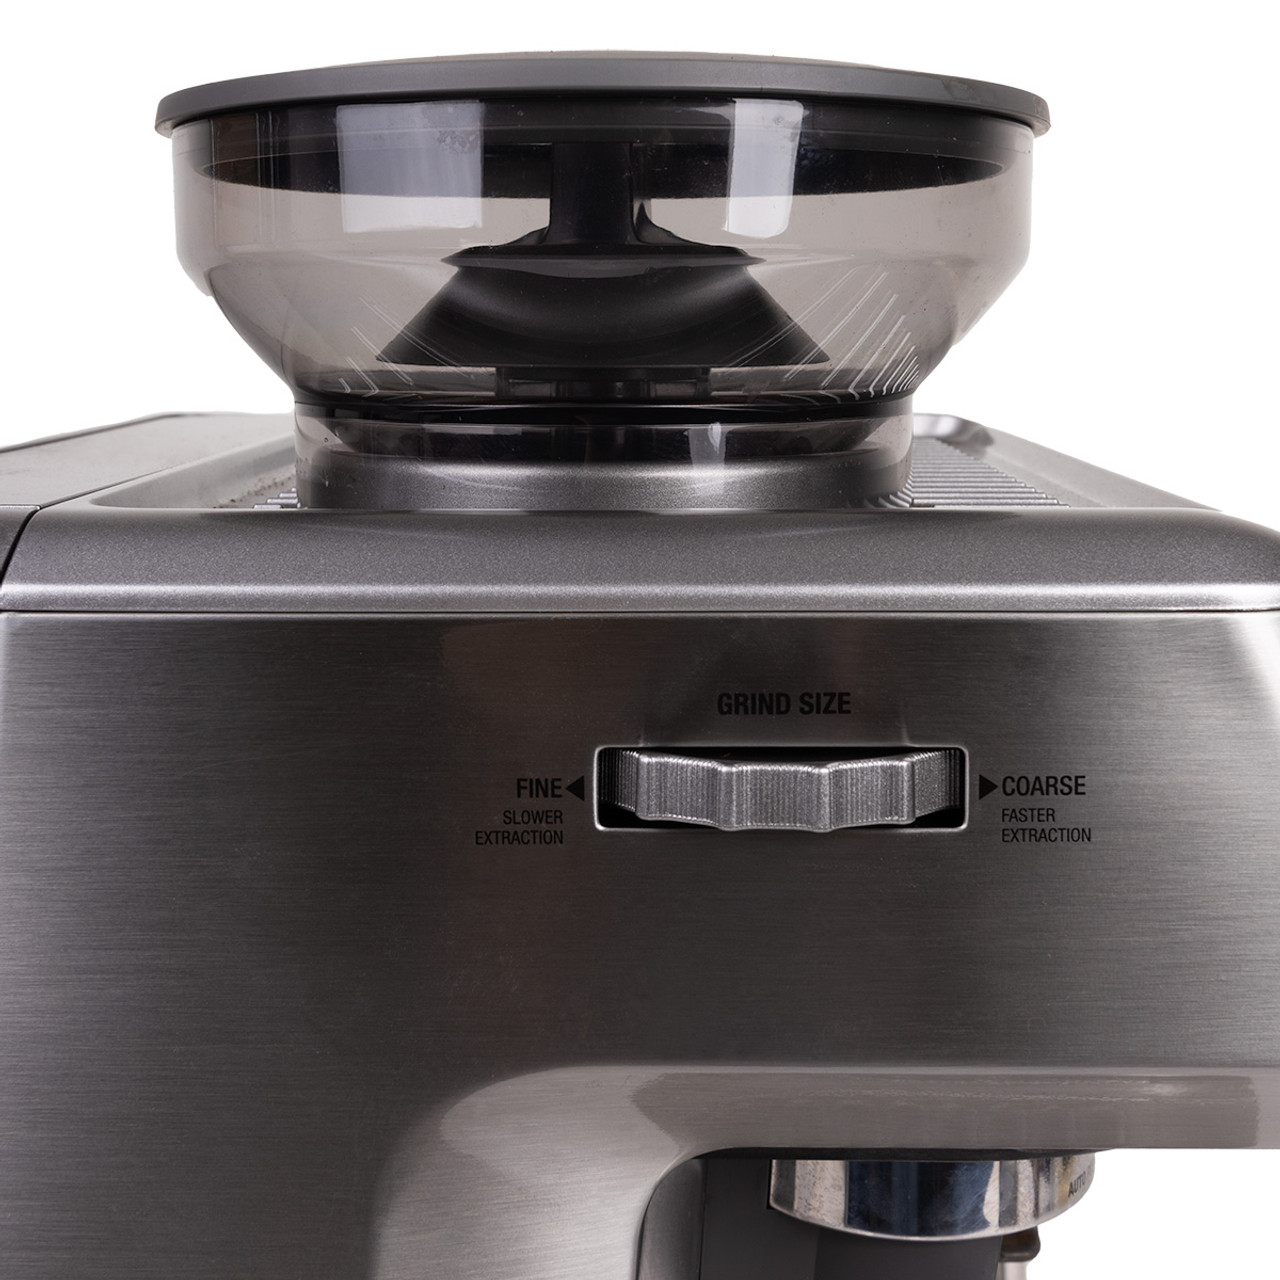 Breville Barista Touch Espresso Machine Brushed Stainless Steel